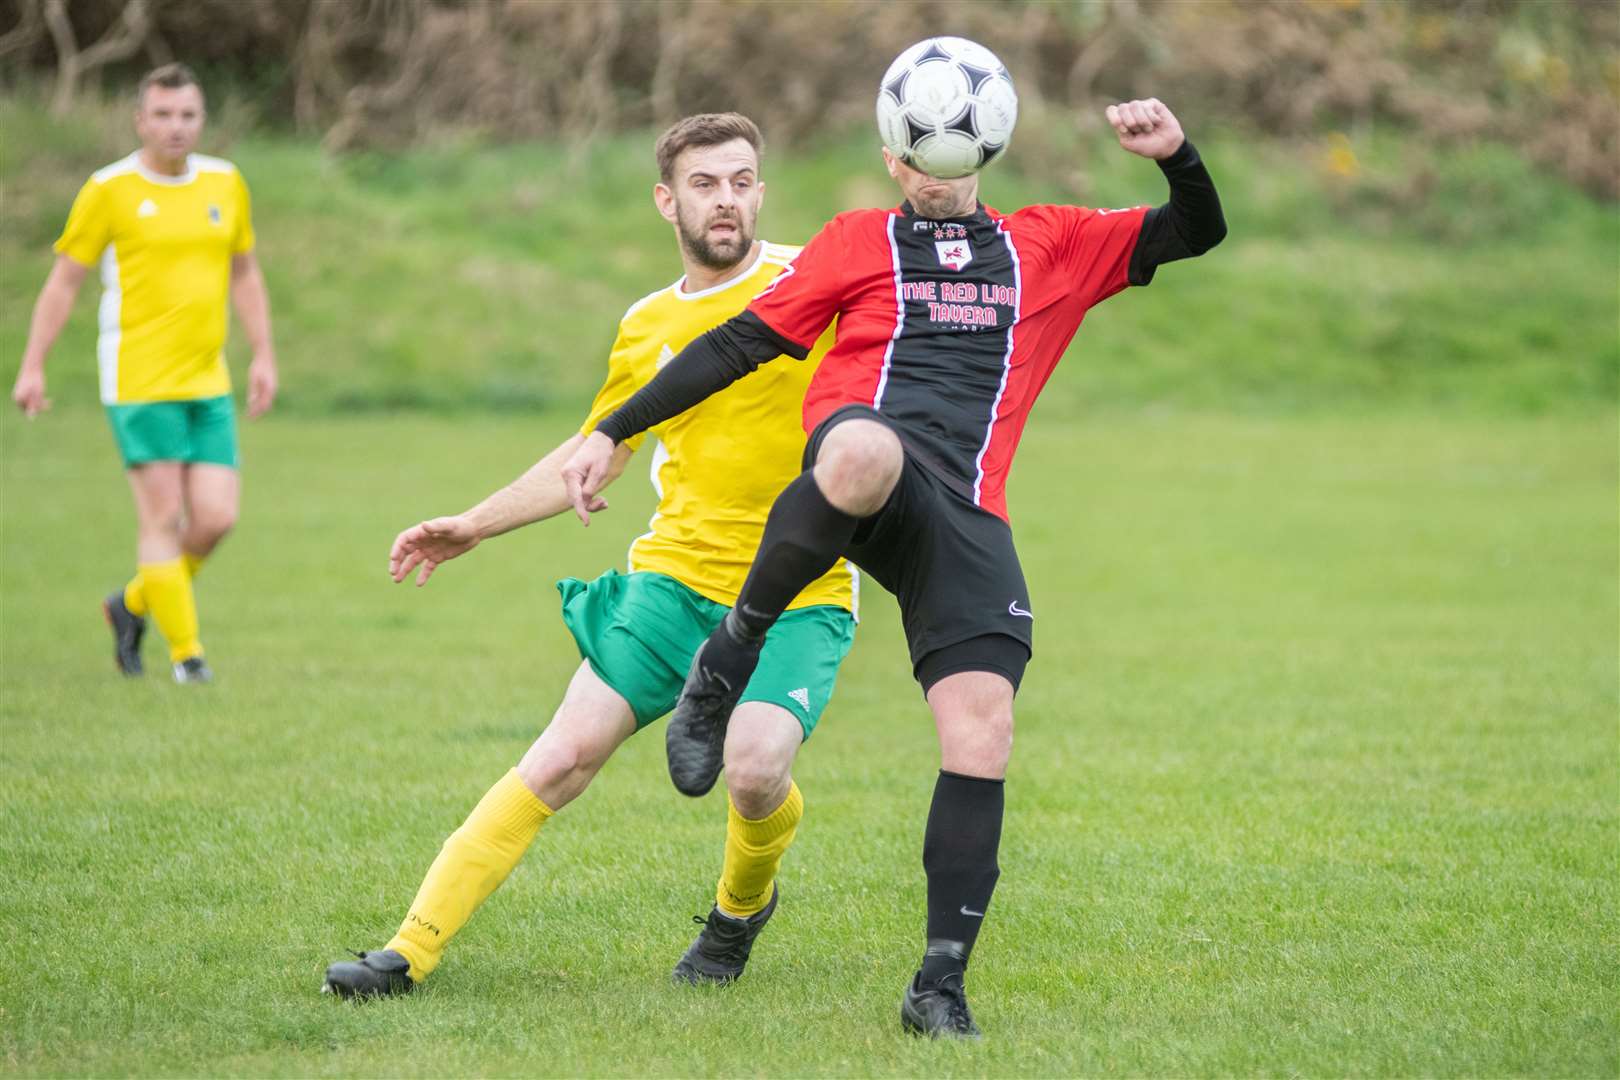 Hopeman's Connor McArthur and Fochabers' Gary Burchell compete for the ball...Hopeman FV vs Fochabers FC - Moray Welfare League...Picture: Daniel Forsyth..